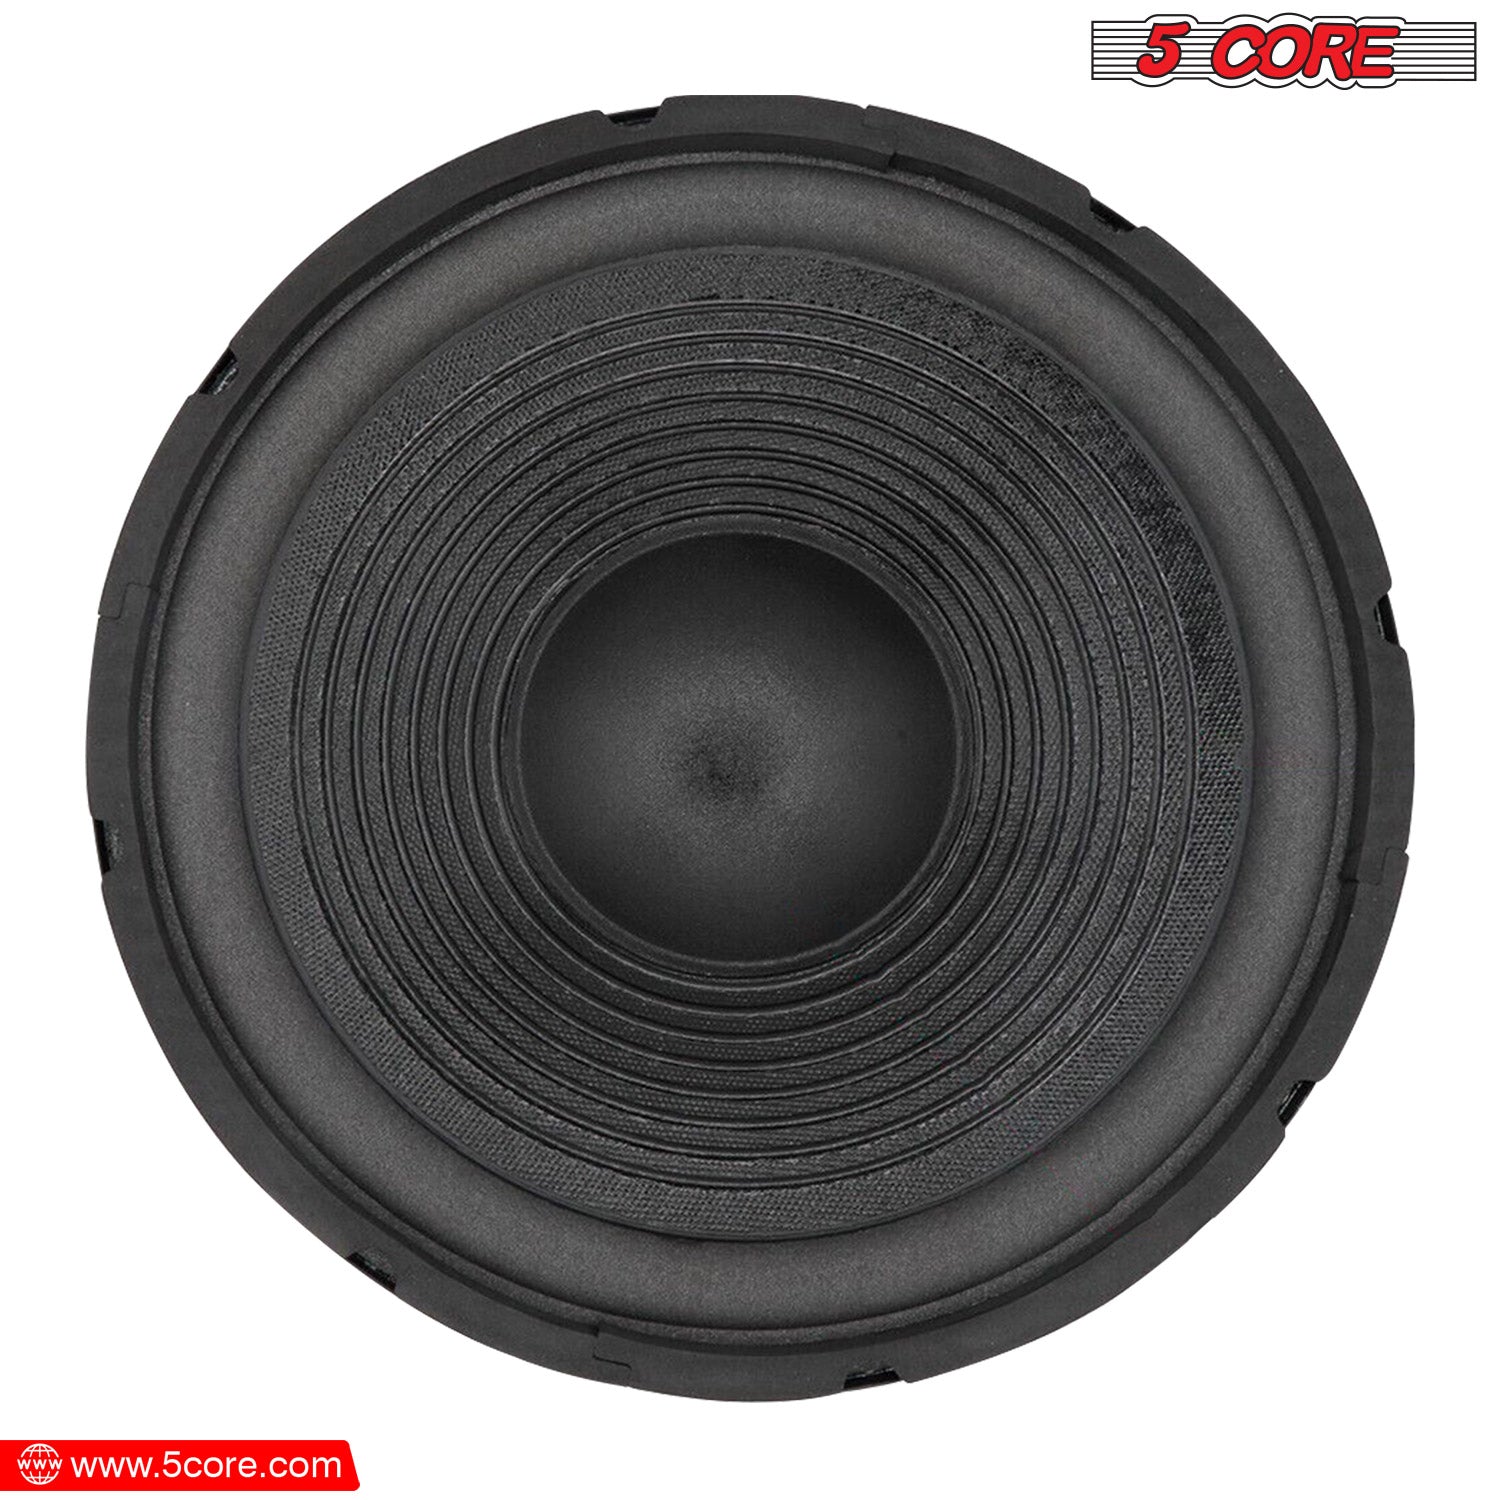 5 Core 12 Inch Guitar Replacement Speaker - 120W RMS, 8 Ohm, 23 Oz Magnet